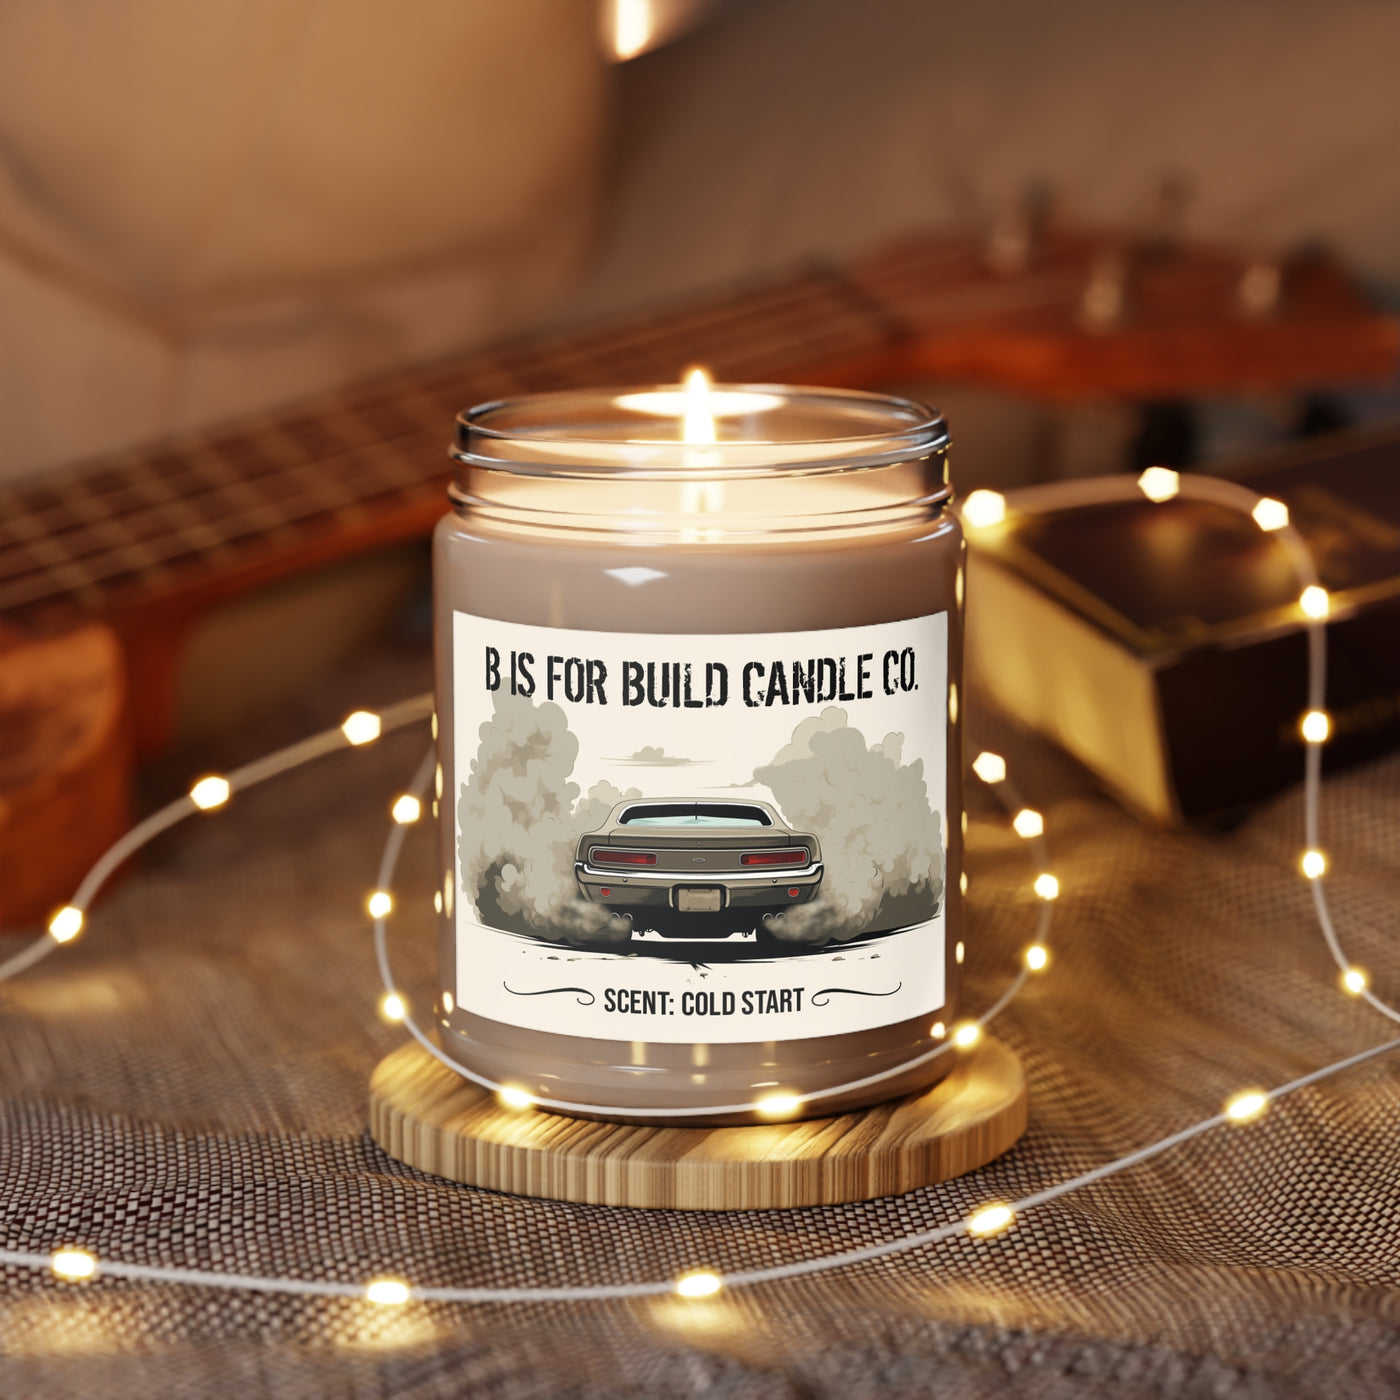 Cold Start Scented Candle